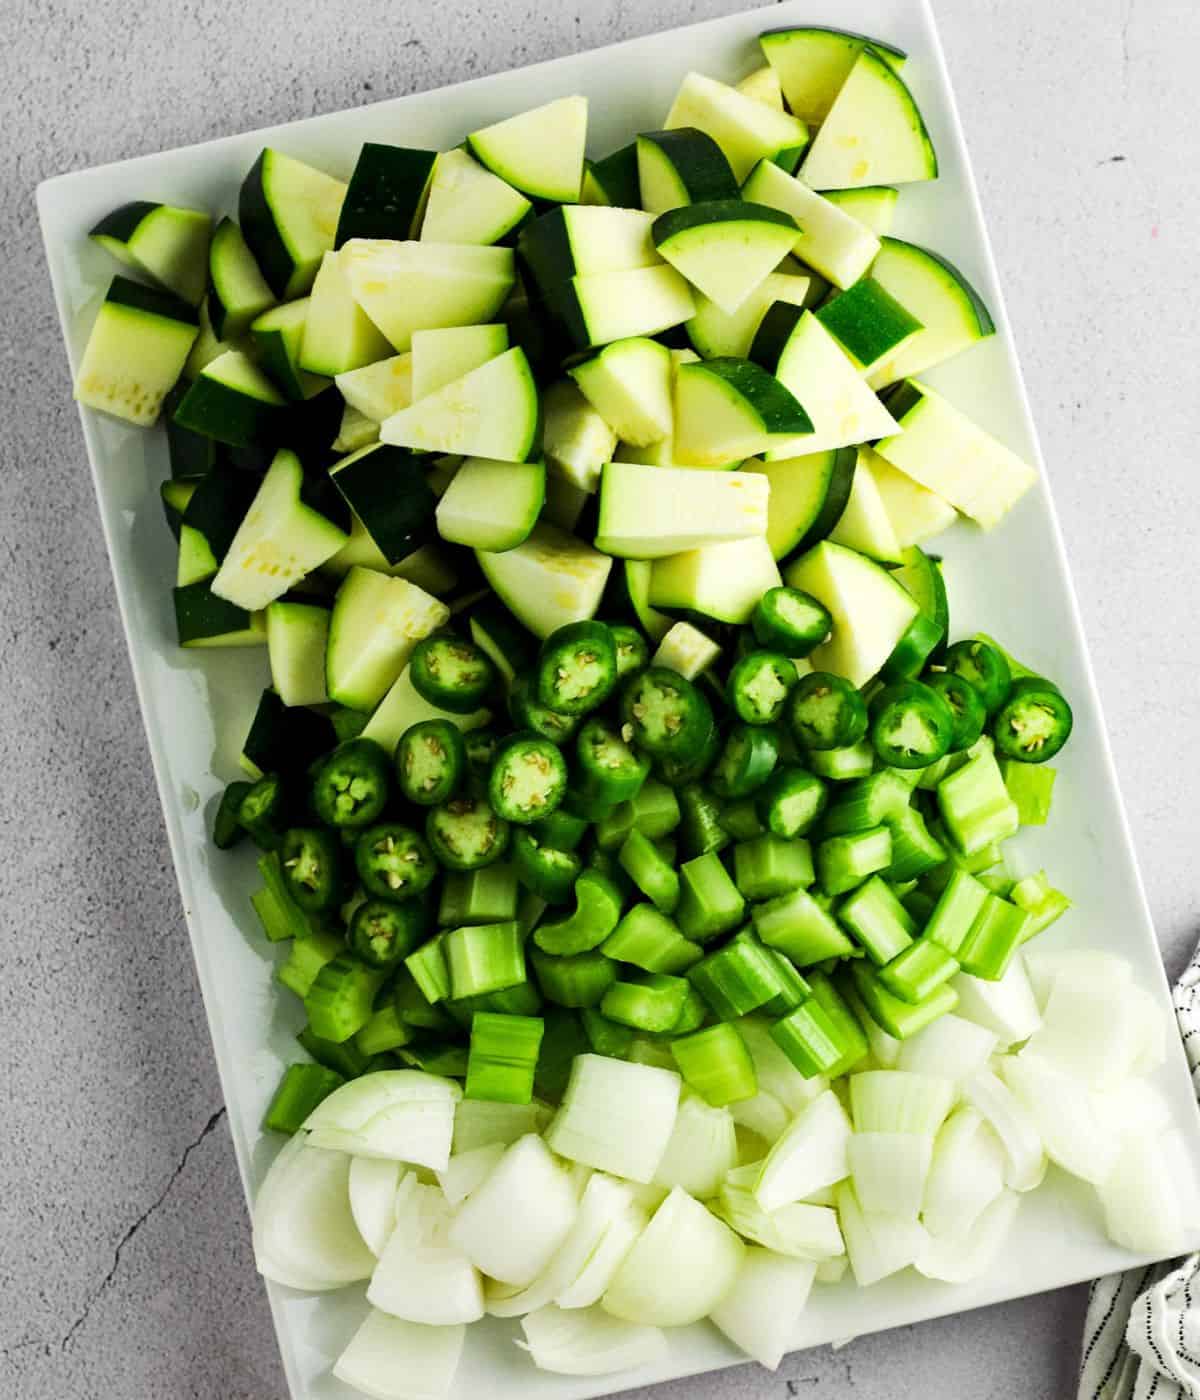 Chopped vegetables for making pickles.